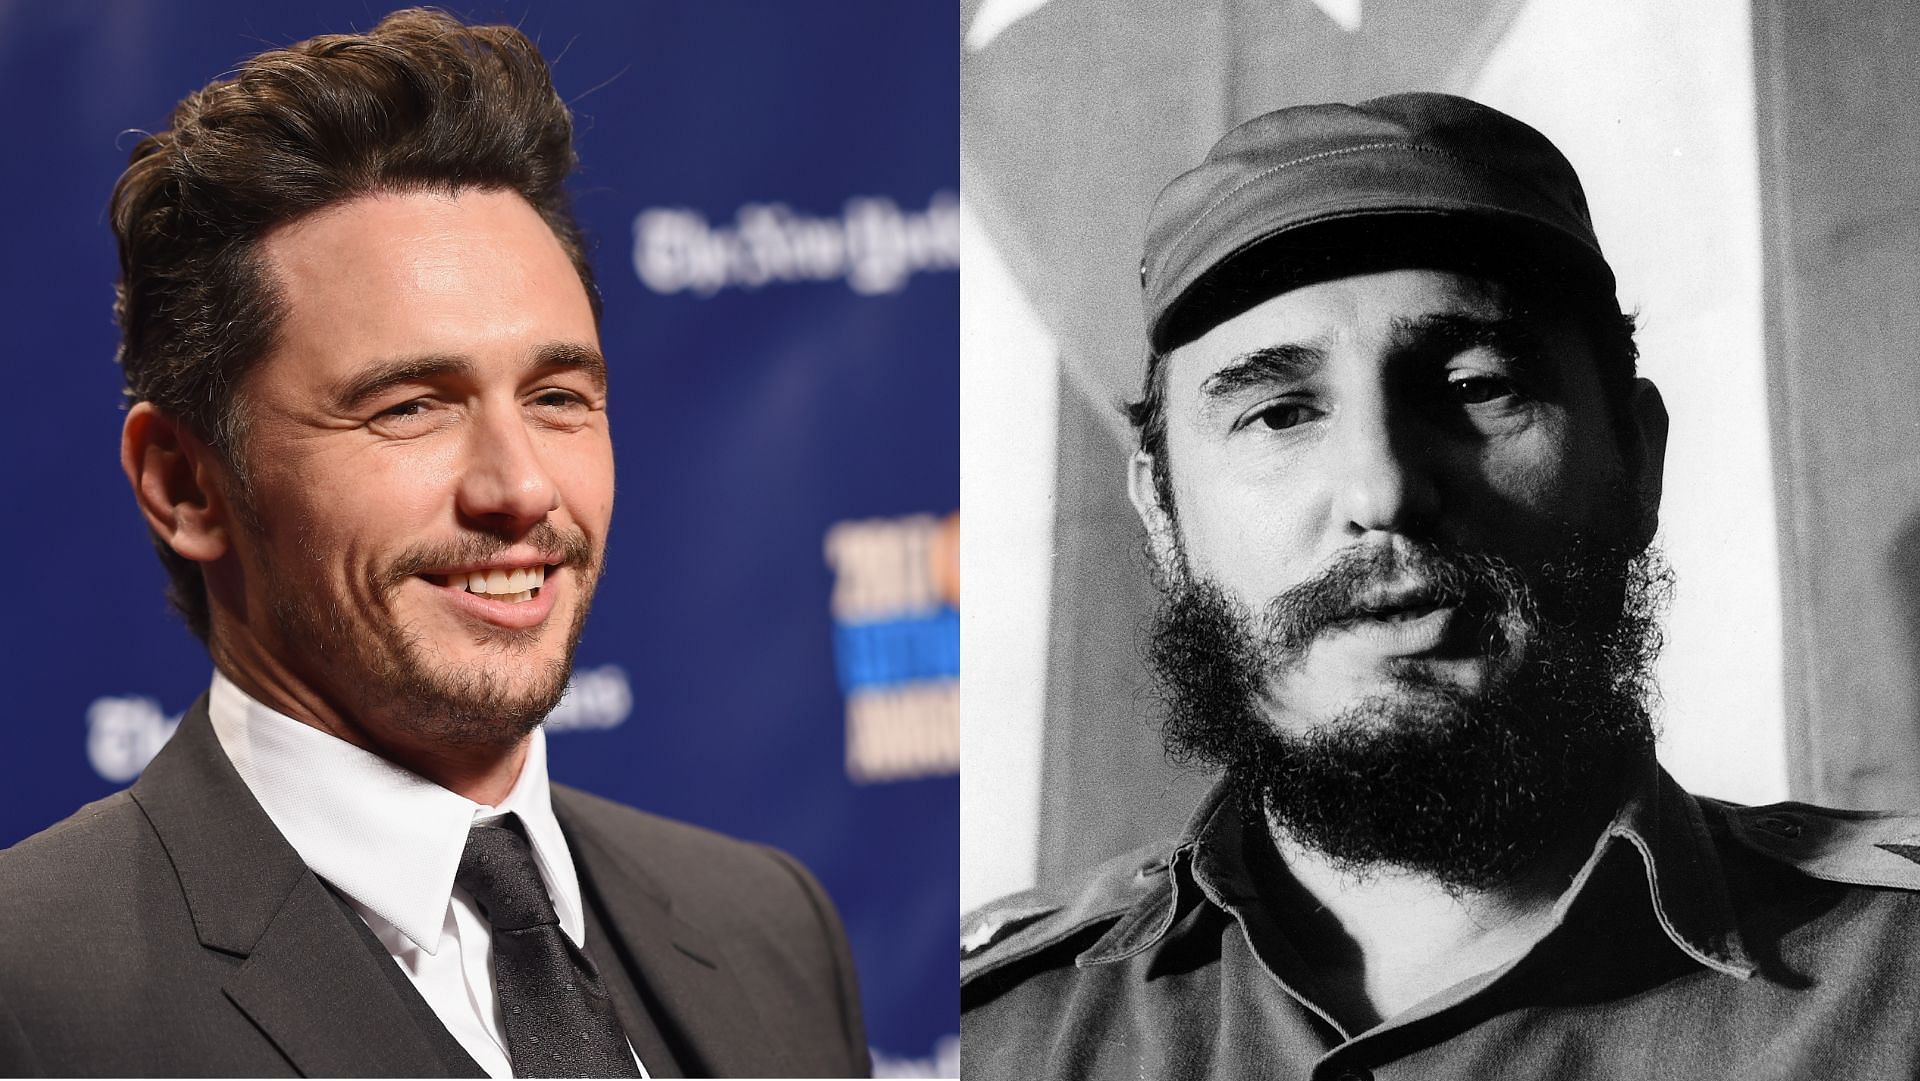 Who's playing Che Guevara, Kevin Spacey?: James Franco ethnicity explored  as actor's casting as Fidel Castro sparks online backlash